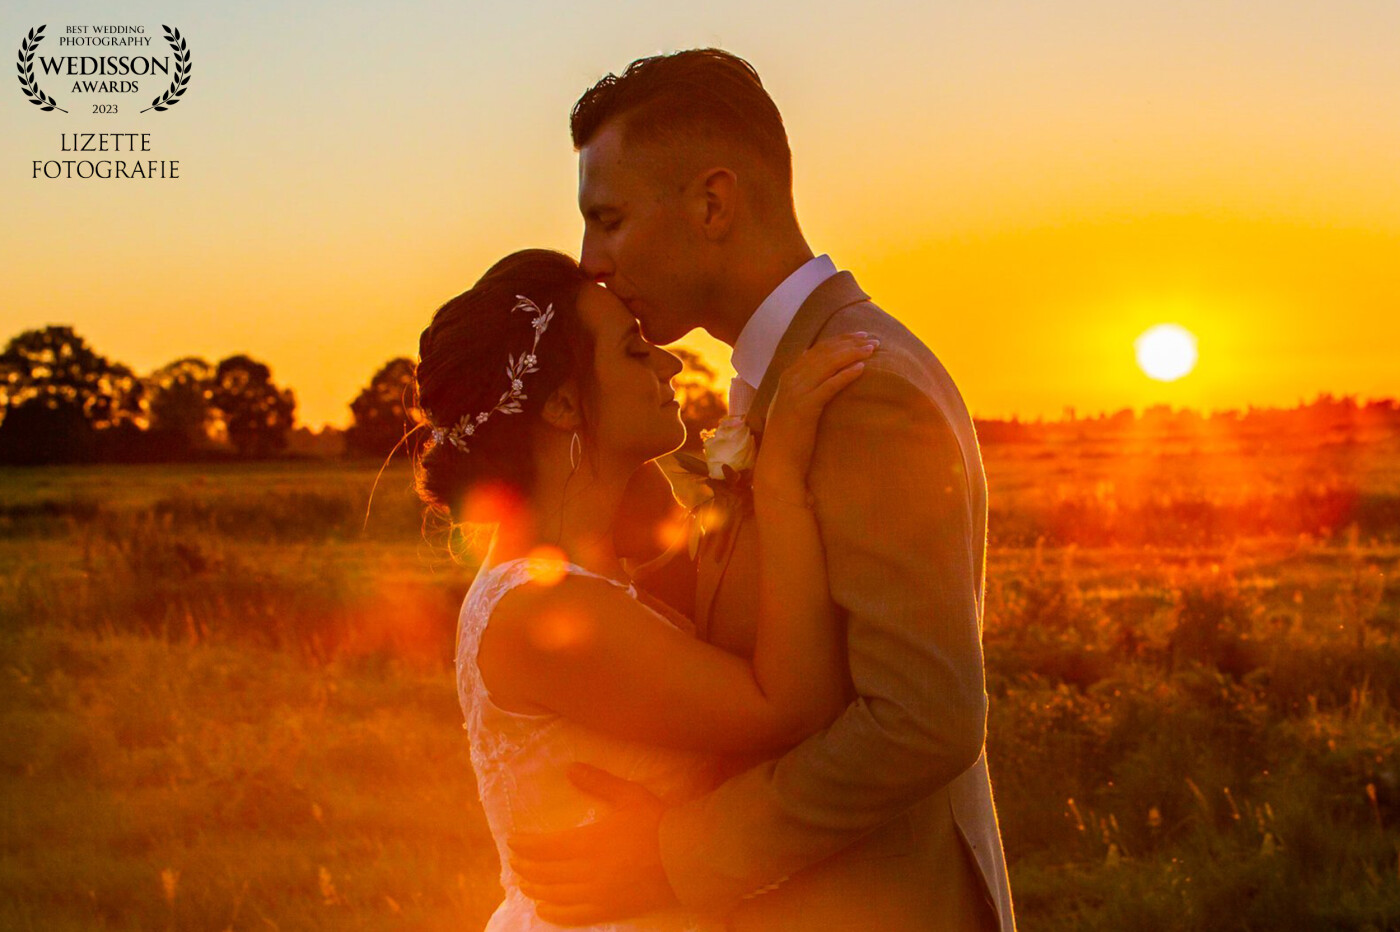 beautiful sunsetshoot in The Netherlands, with gorgeous wedding couple. love their intimacy, and the colours of the sun